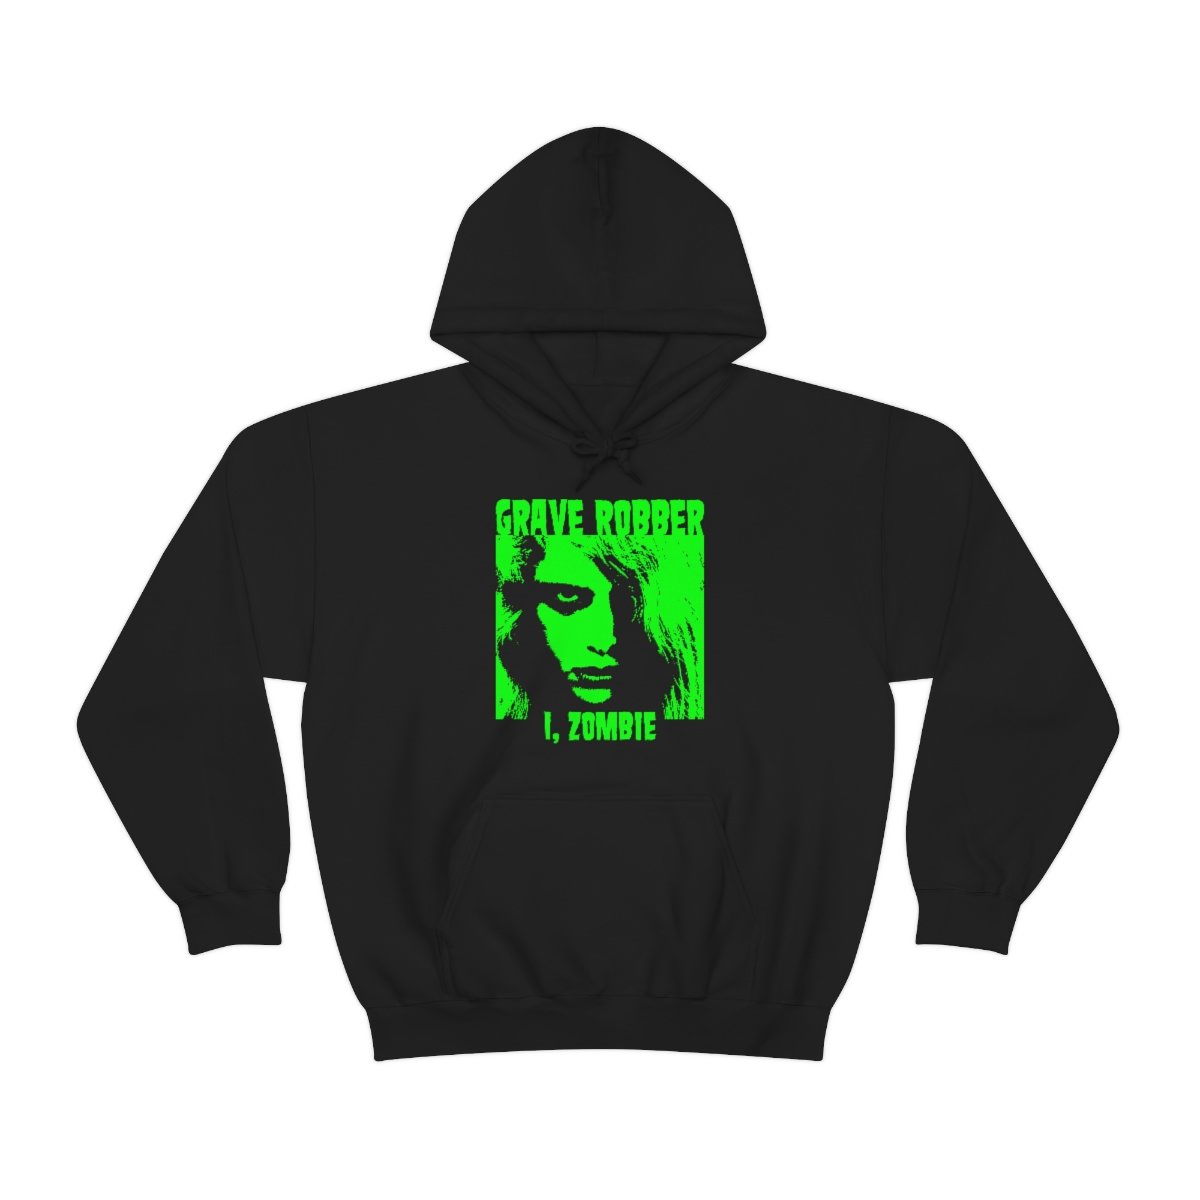 Grave Robber – I, Zombie Pullover Hooded Sweatshirt